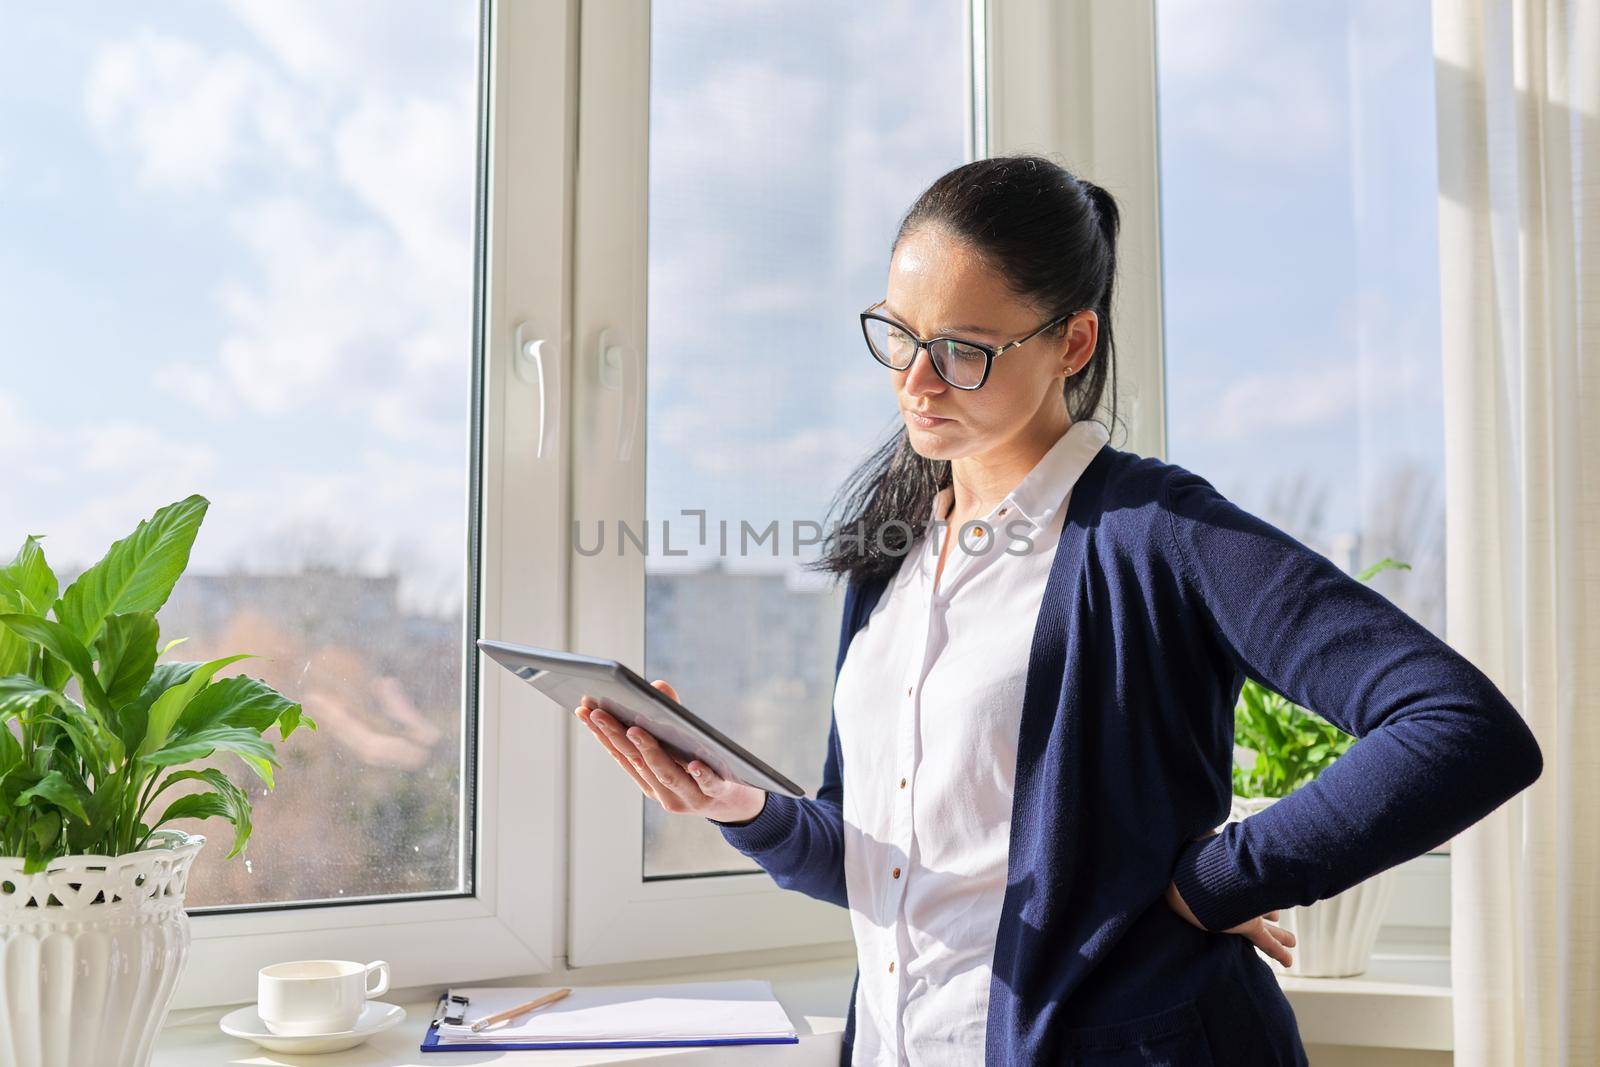 Serious business woman working remotely in her home office, talking on video call, using digital tablet. Freelance, technology, telecommunications, business remotely, video communication near window